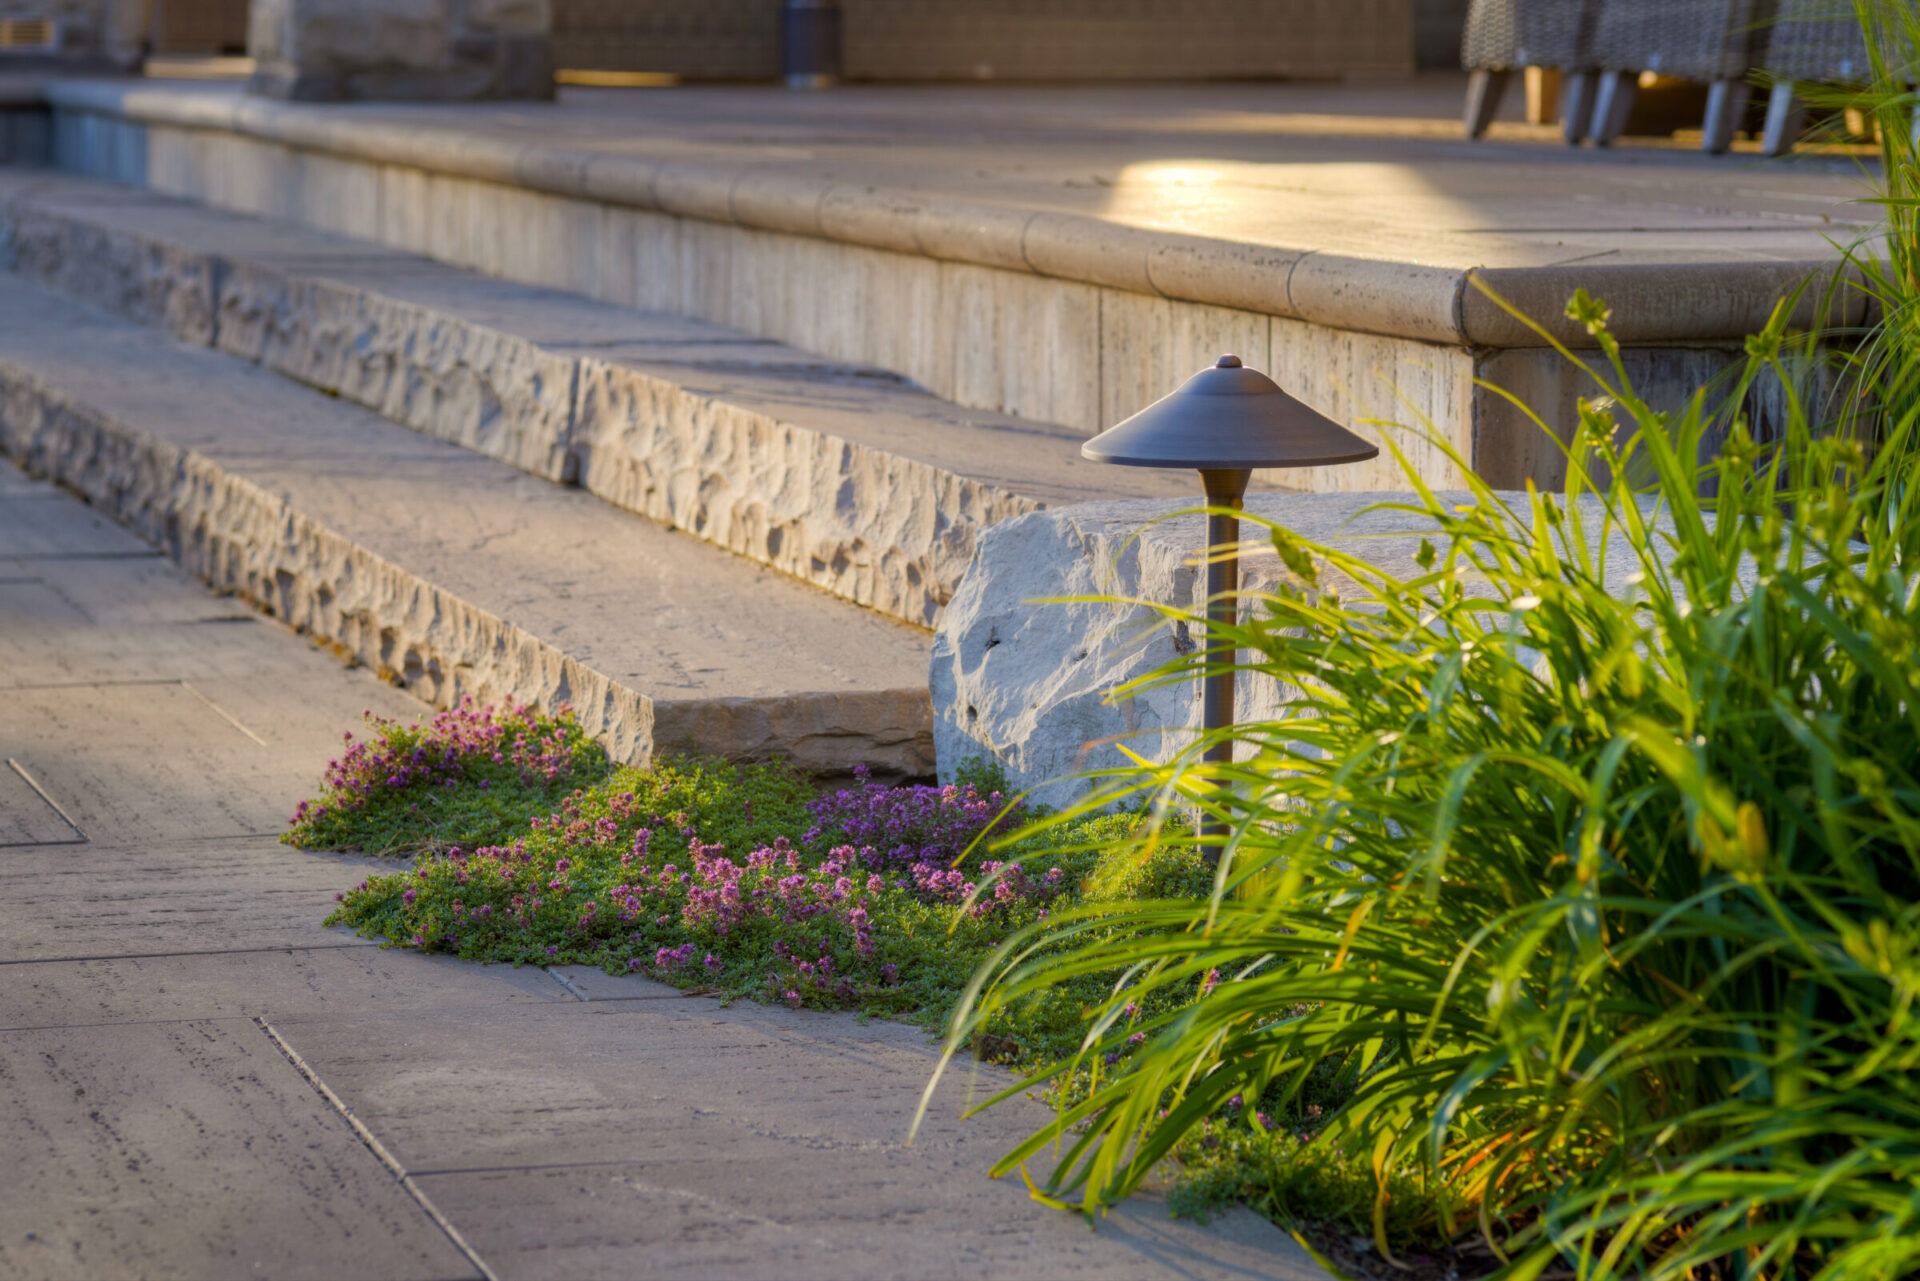 This image displays an outdoor setting with a pathway, a stone bench, ornamental grasses, and a metal lamp post, indicating a landscaped area, likely in a park or garden.